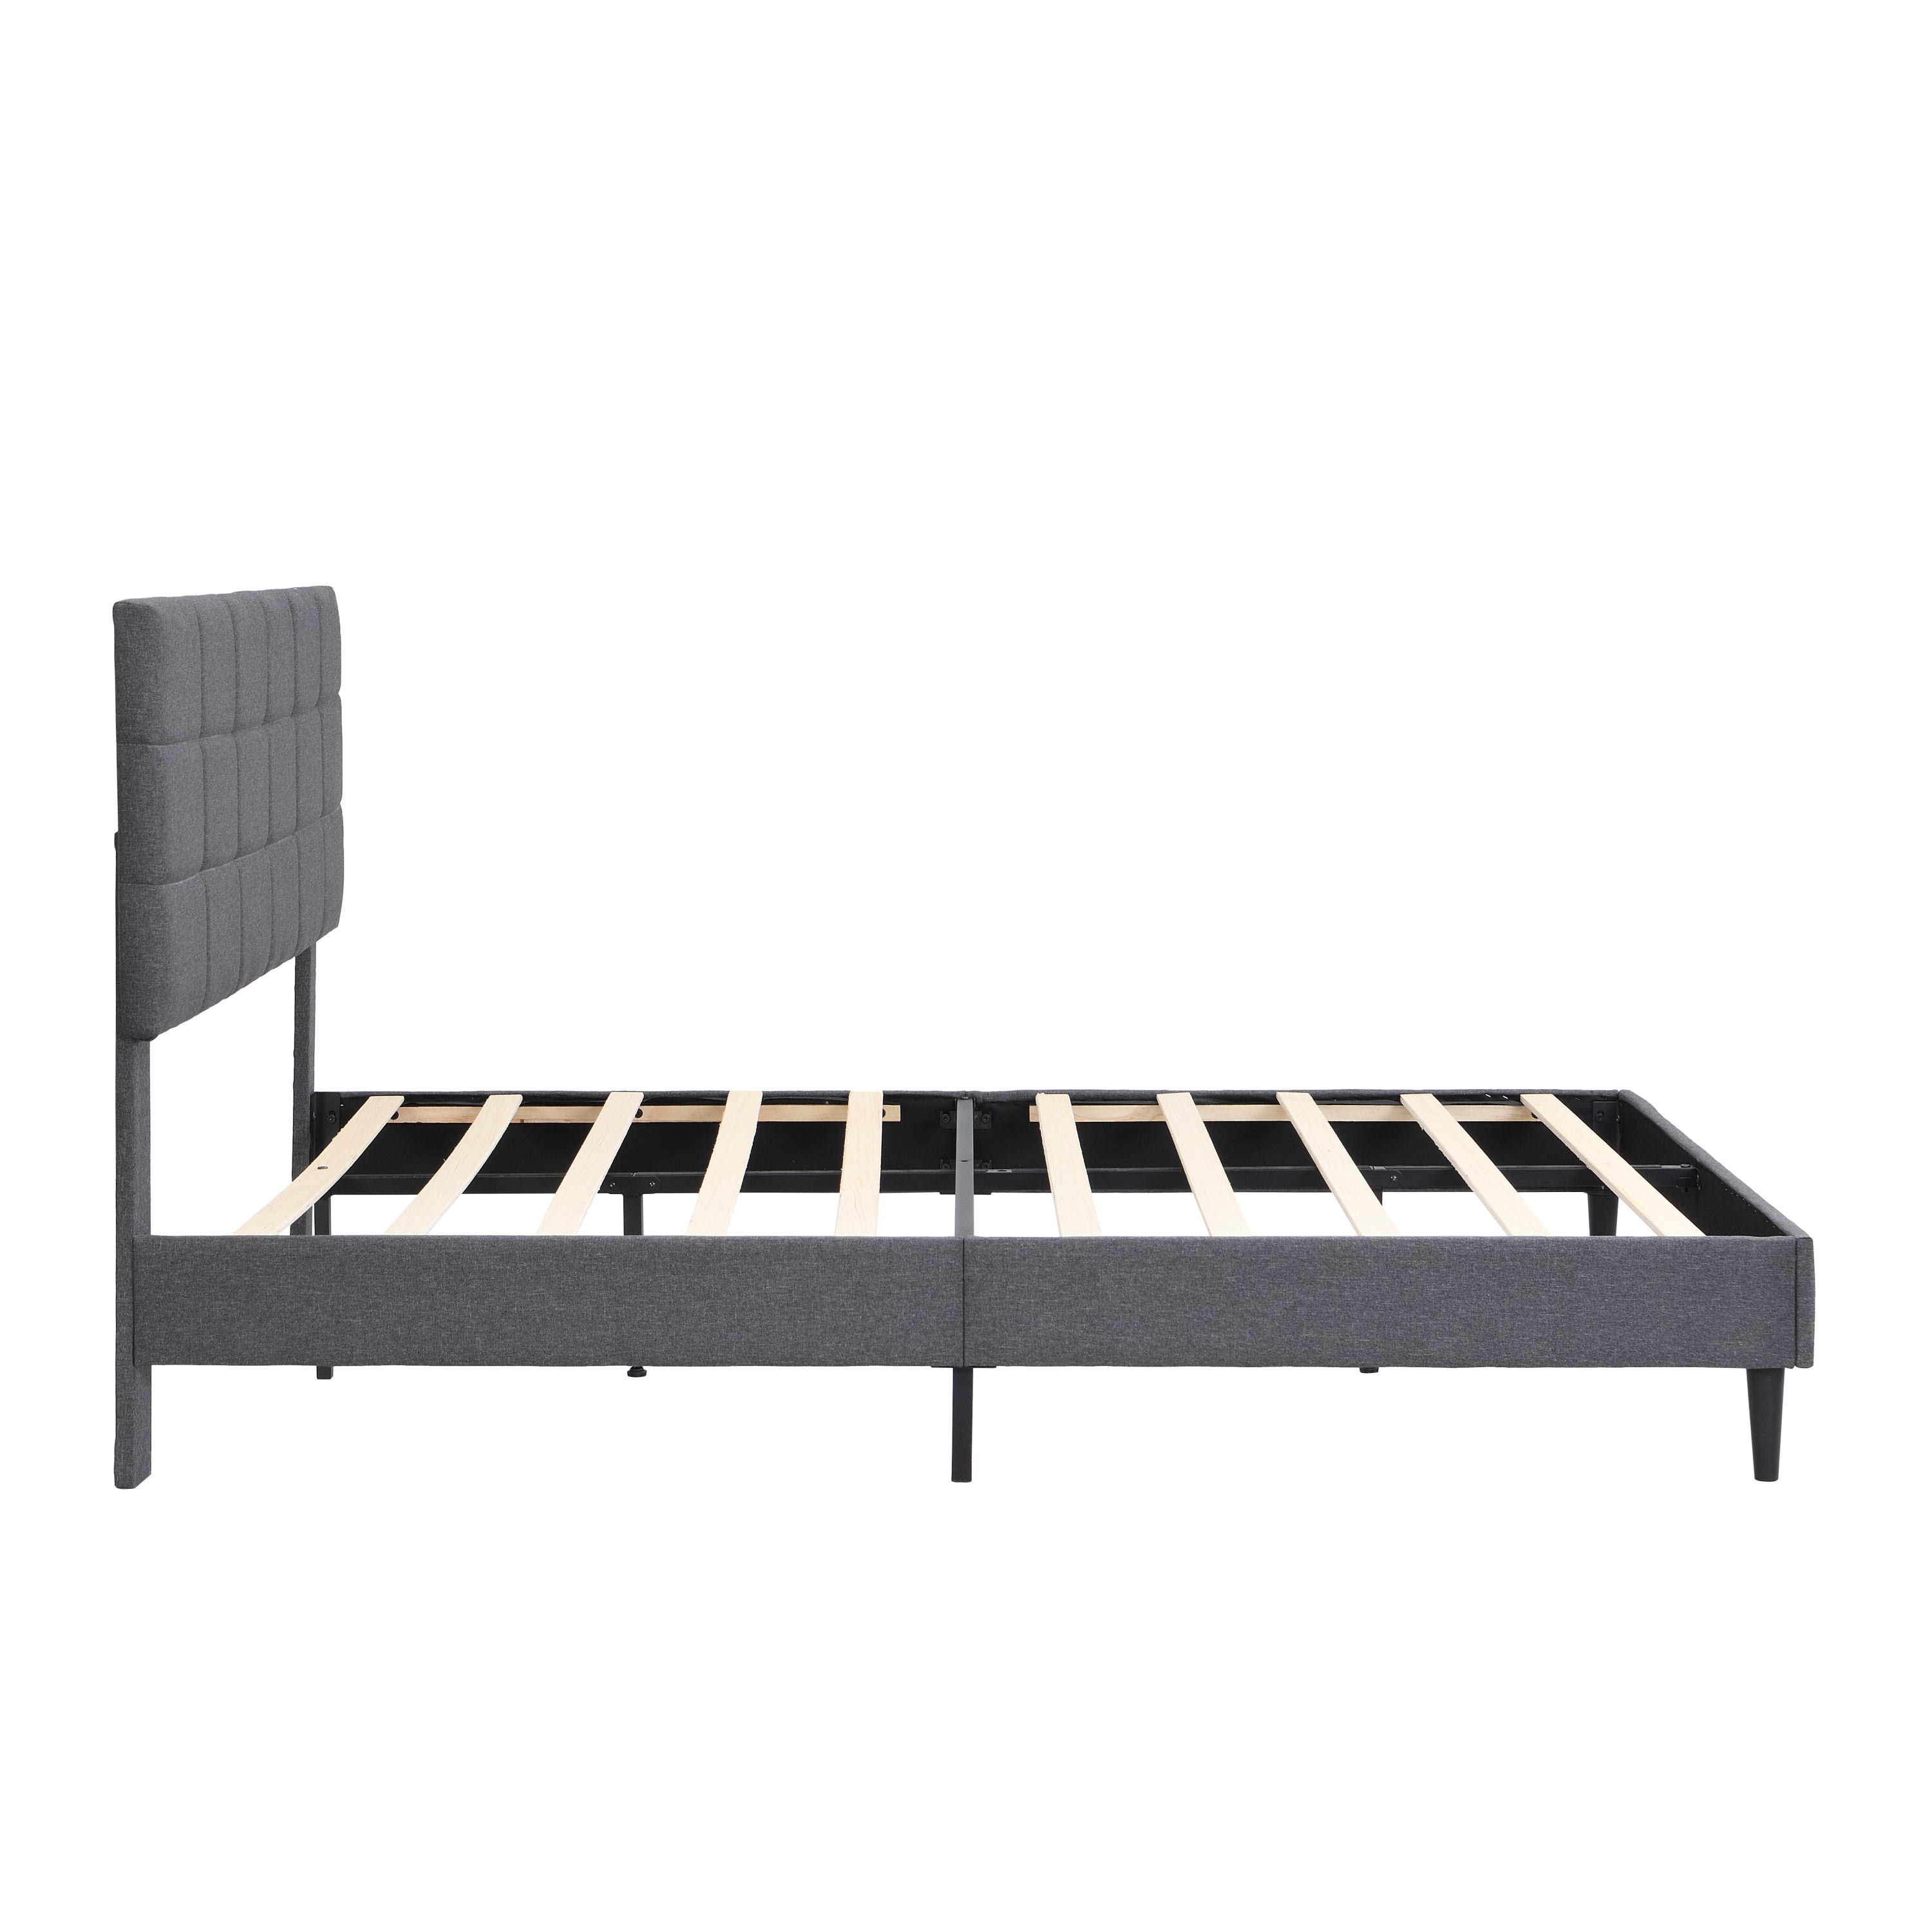 Queen Size Platform Bed Frame with Fabric Upholstered Headboard and Wooden Slats, No Box Spring Needed/Easy Assembly, Gray